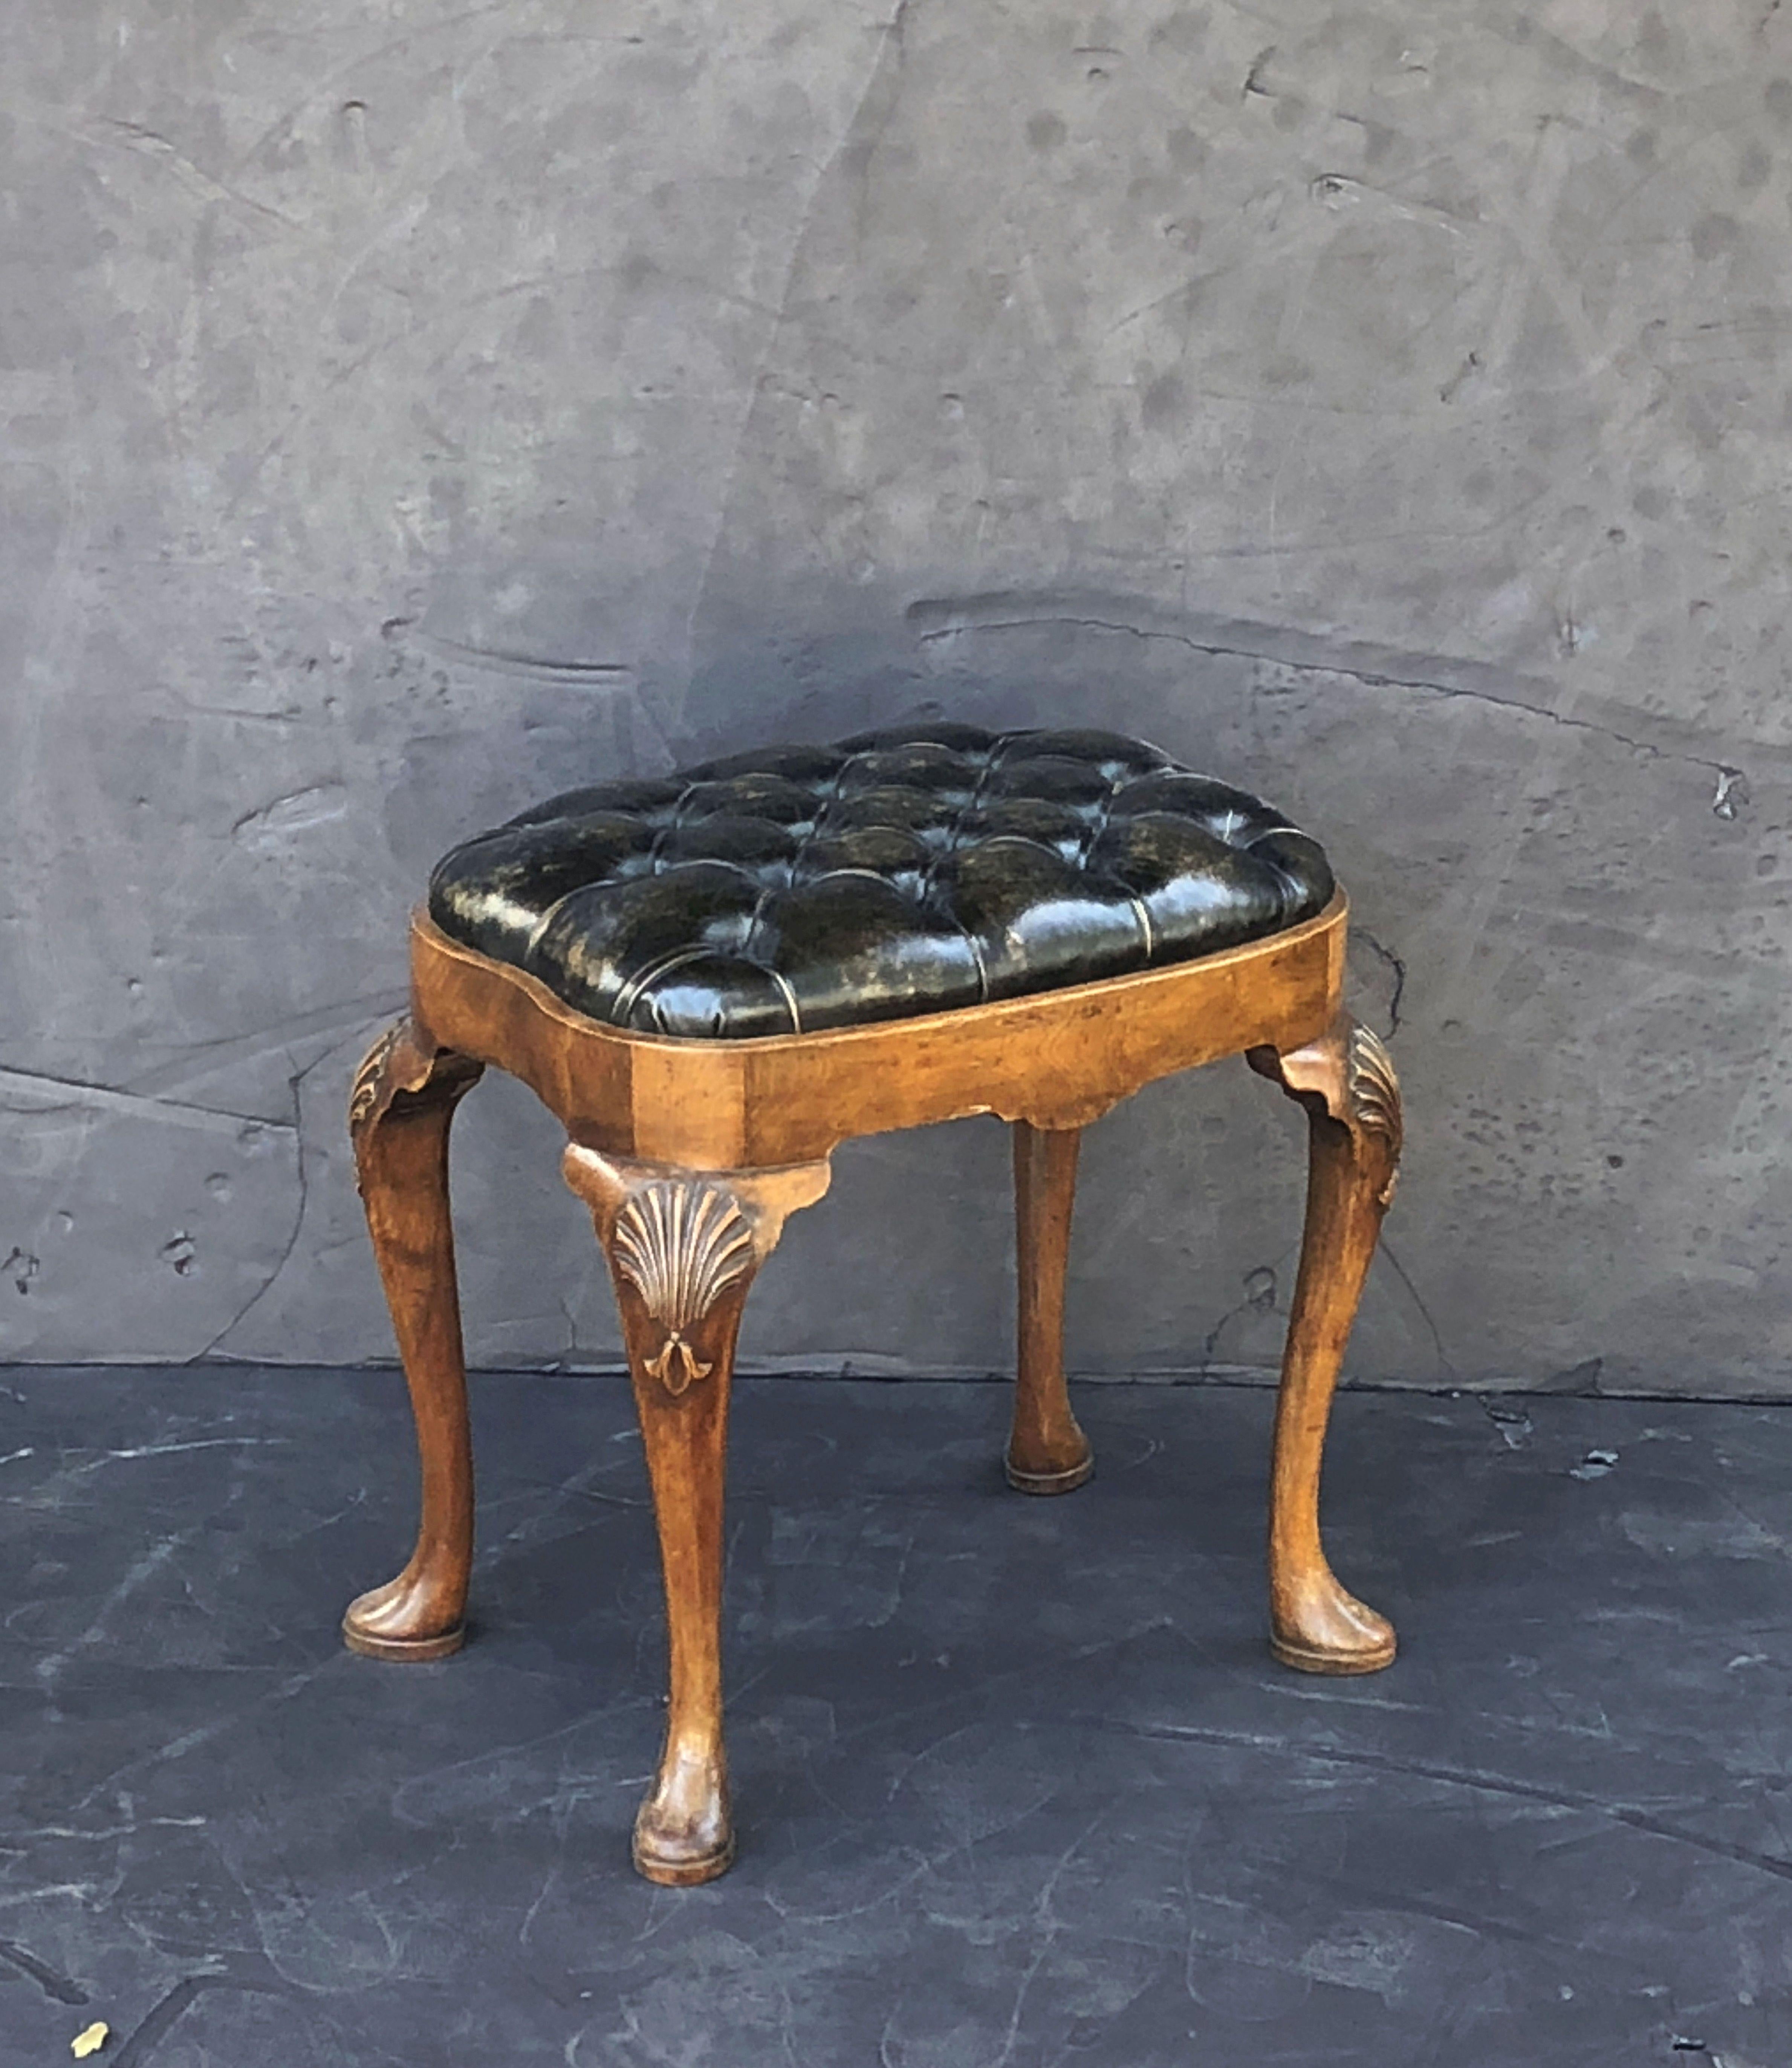 A fine English ovoid ottoman or stool, featuring a tufted black or ebony leather upholstered seat on a frame of four carved walnut cabriole legs, with shell design on each leg.